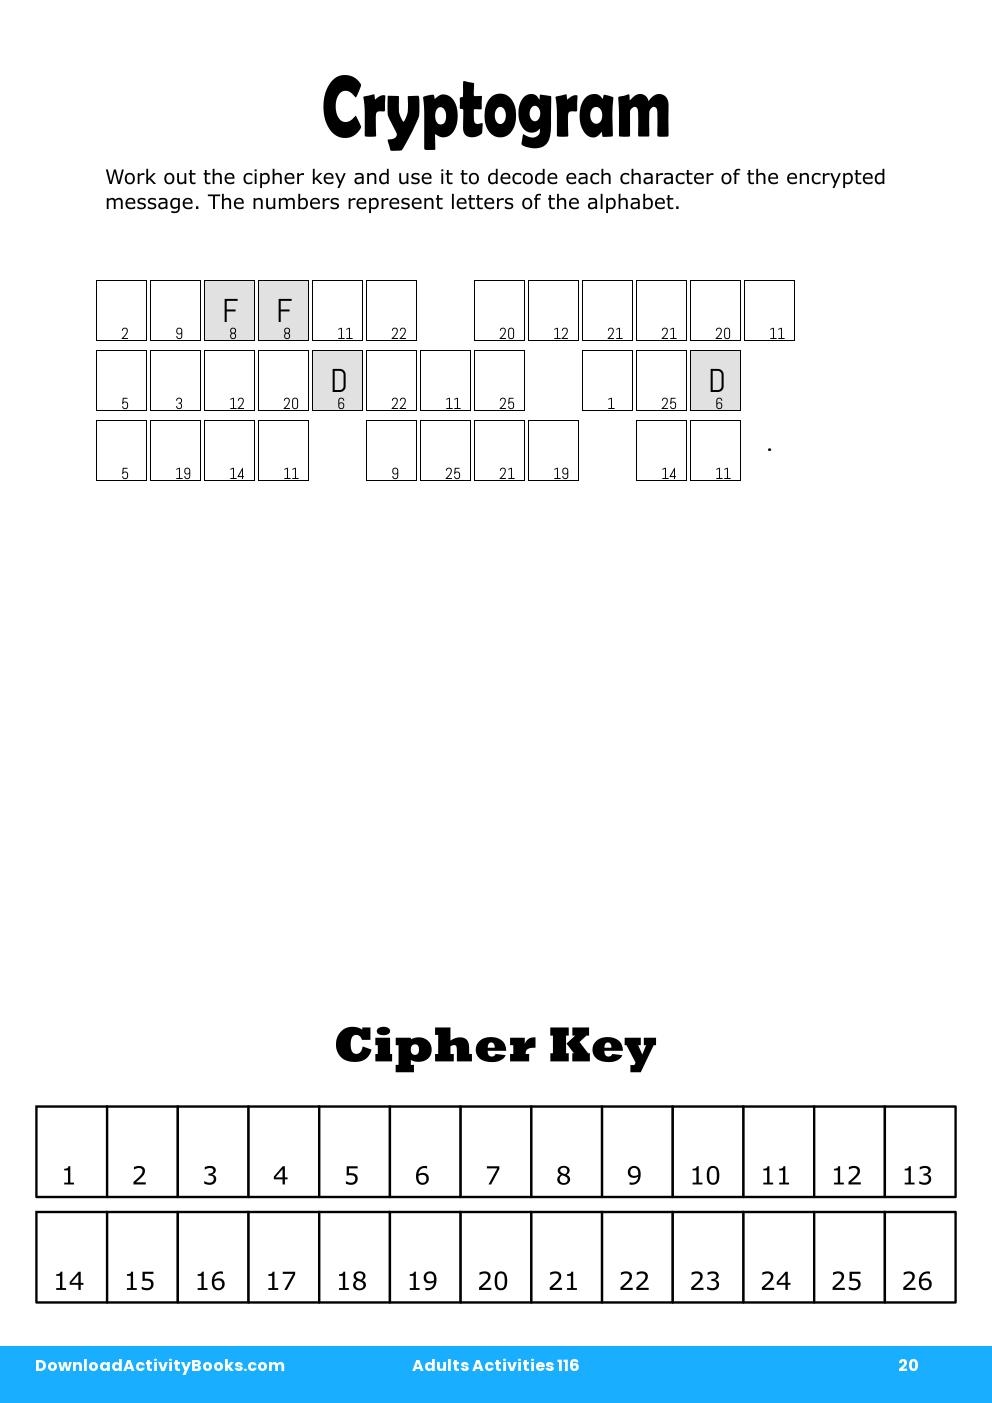 Cryptogram in Adults Activities 116